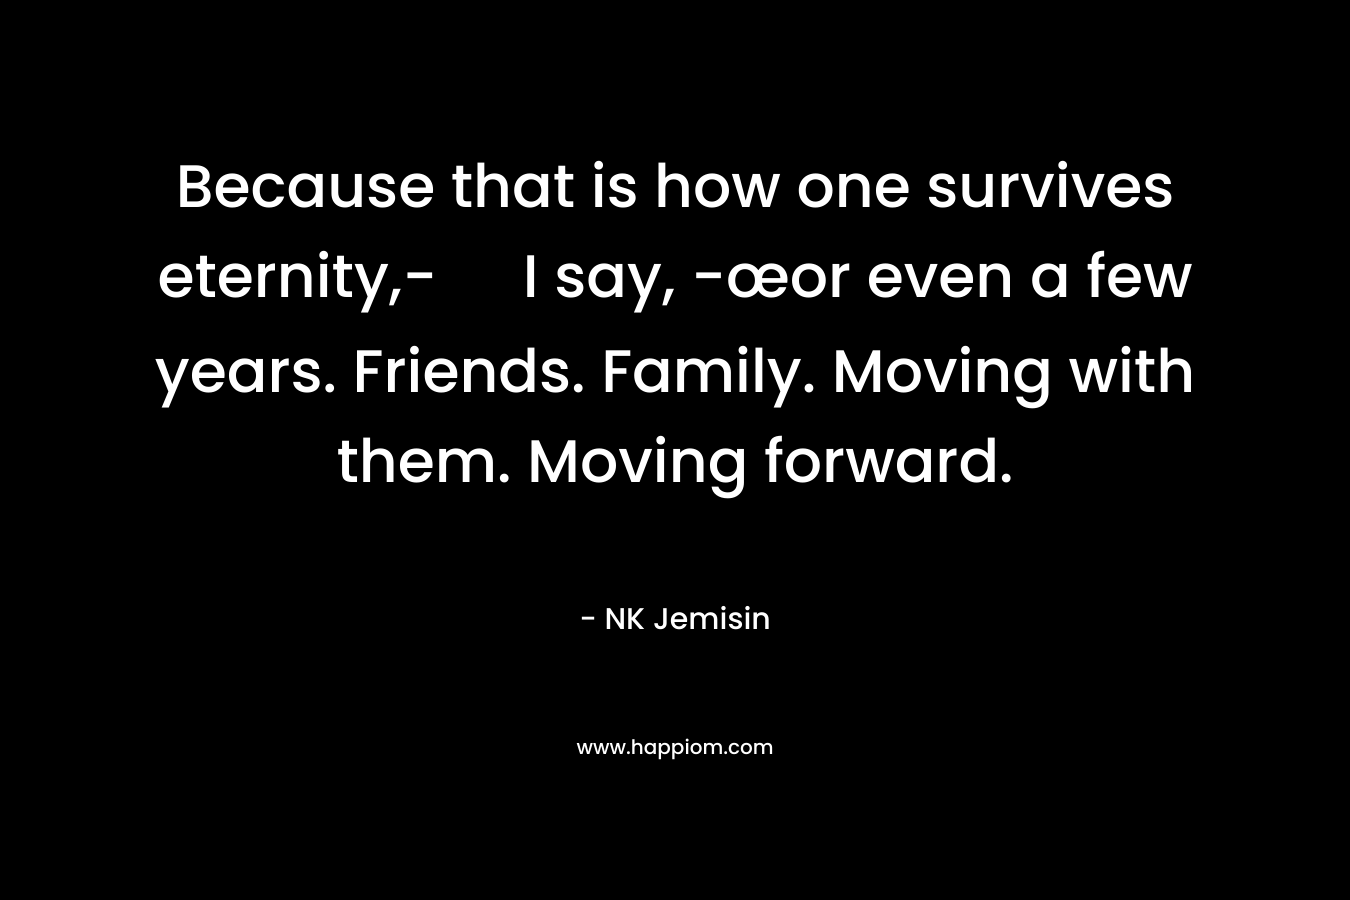 Because that is how one survives eternity,- I say, -œor even a few years. Friends. Family. Moving with them. Moving forward.